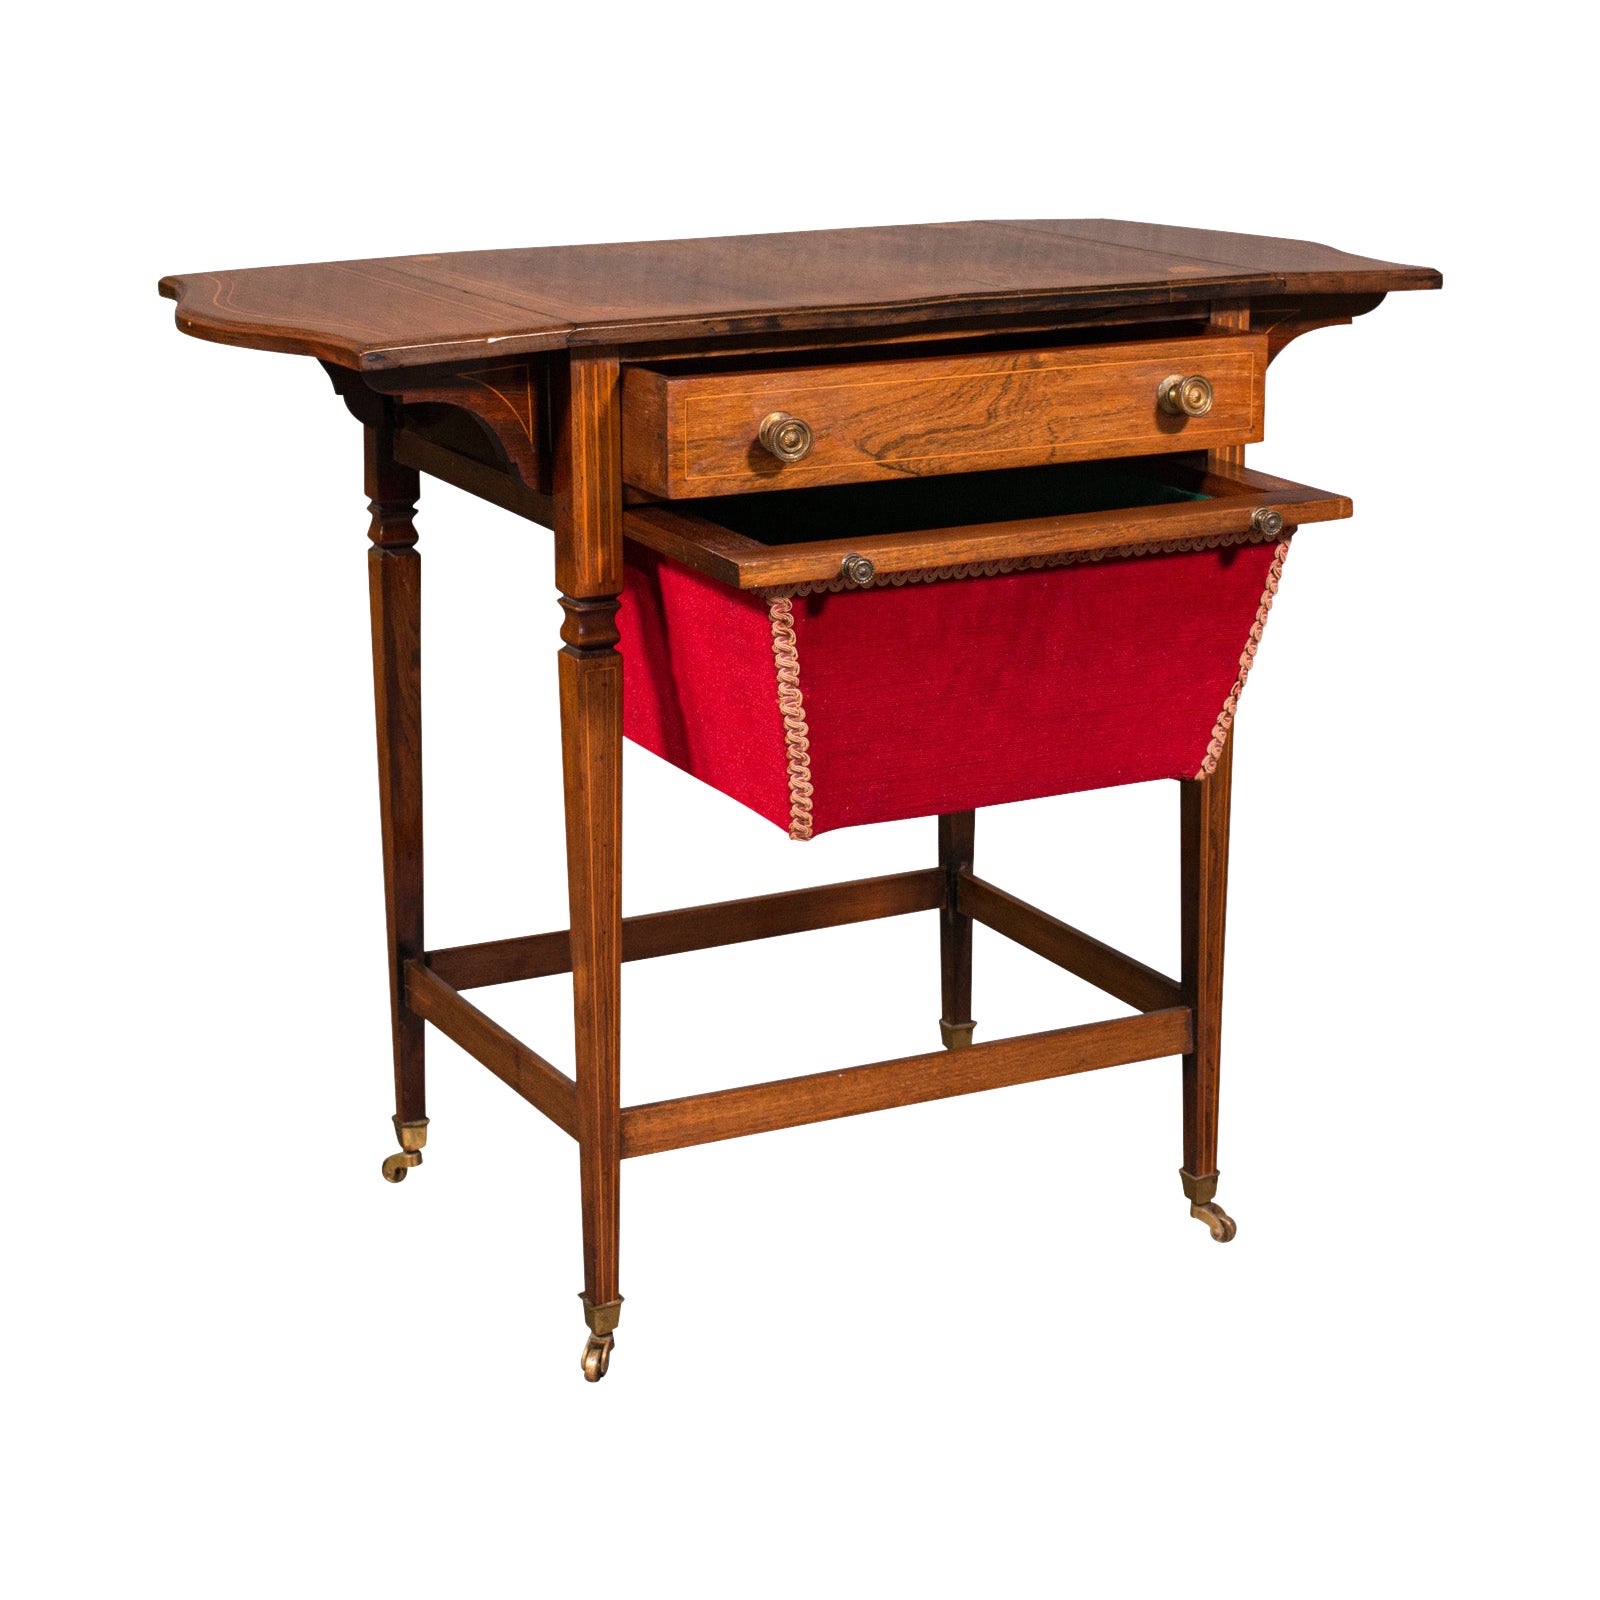 Antique Drop Leaf Sewing Table, English, Rosewood, Side, Lamp, Regency, C.1820 For Sale